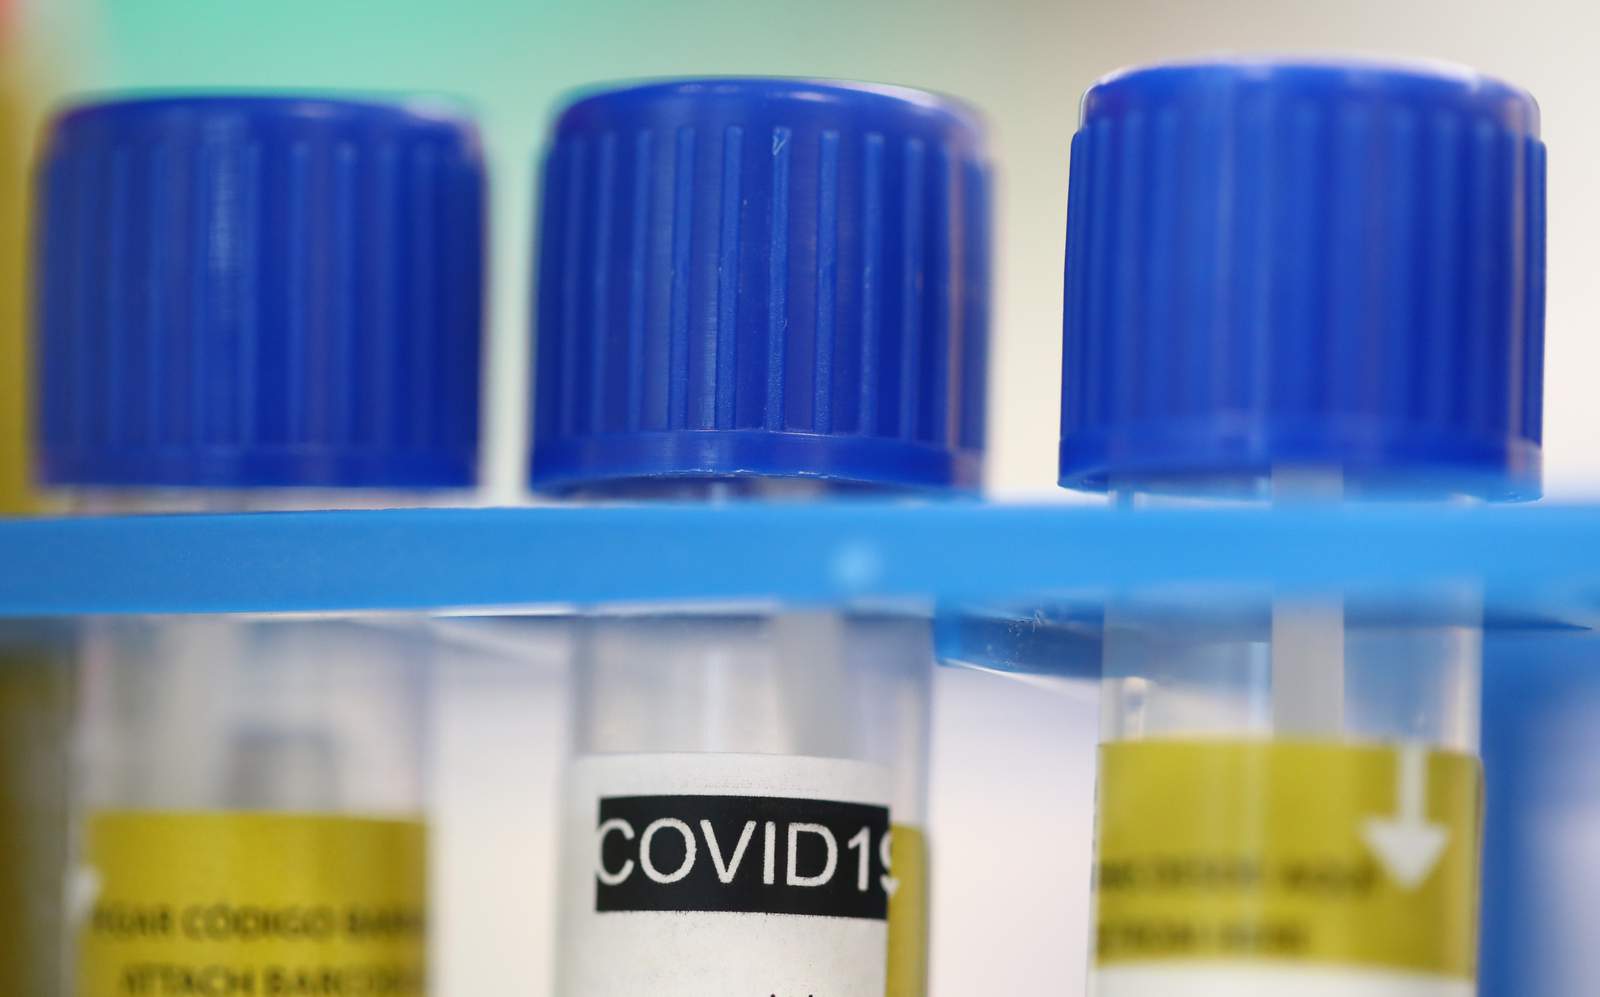 Florida prison employee tests positive for COVID-19